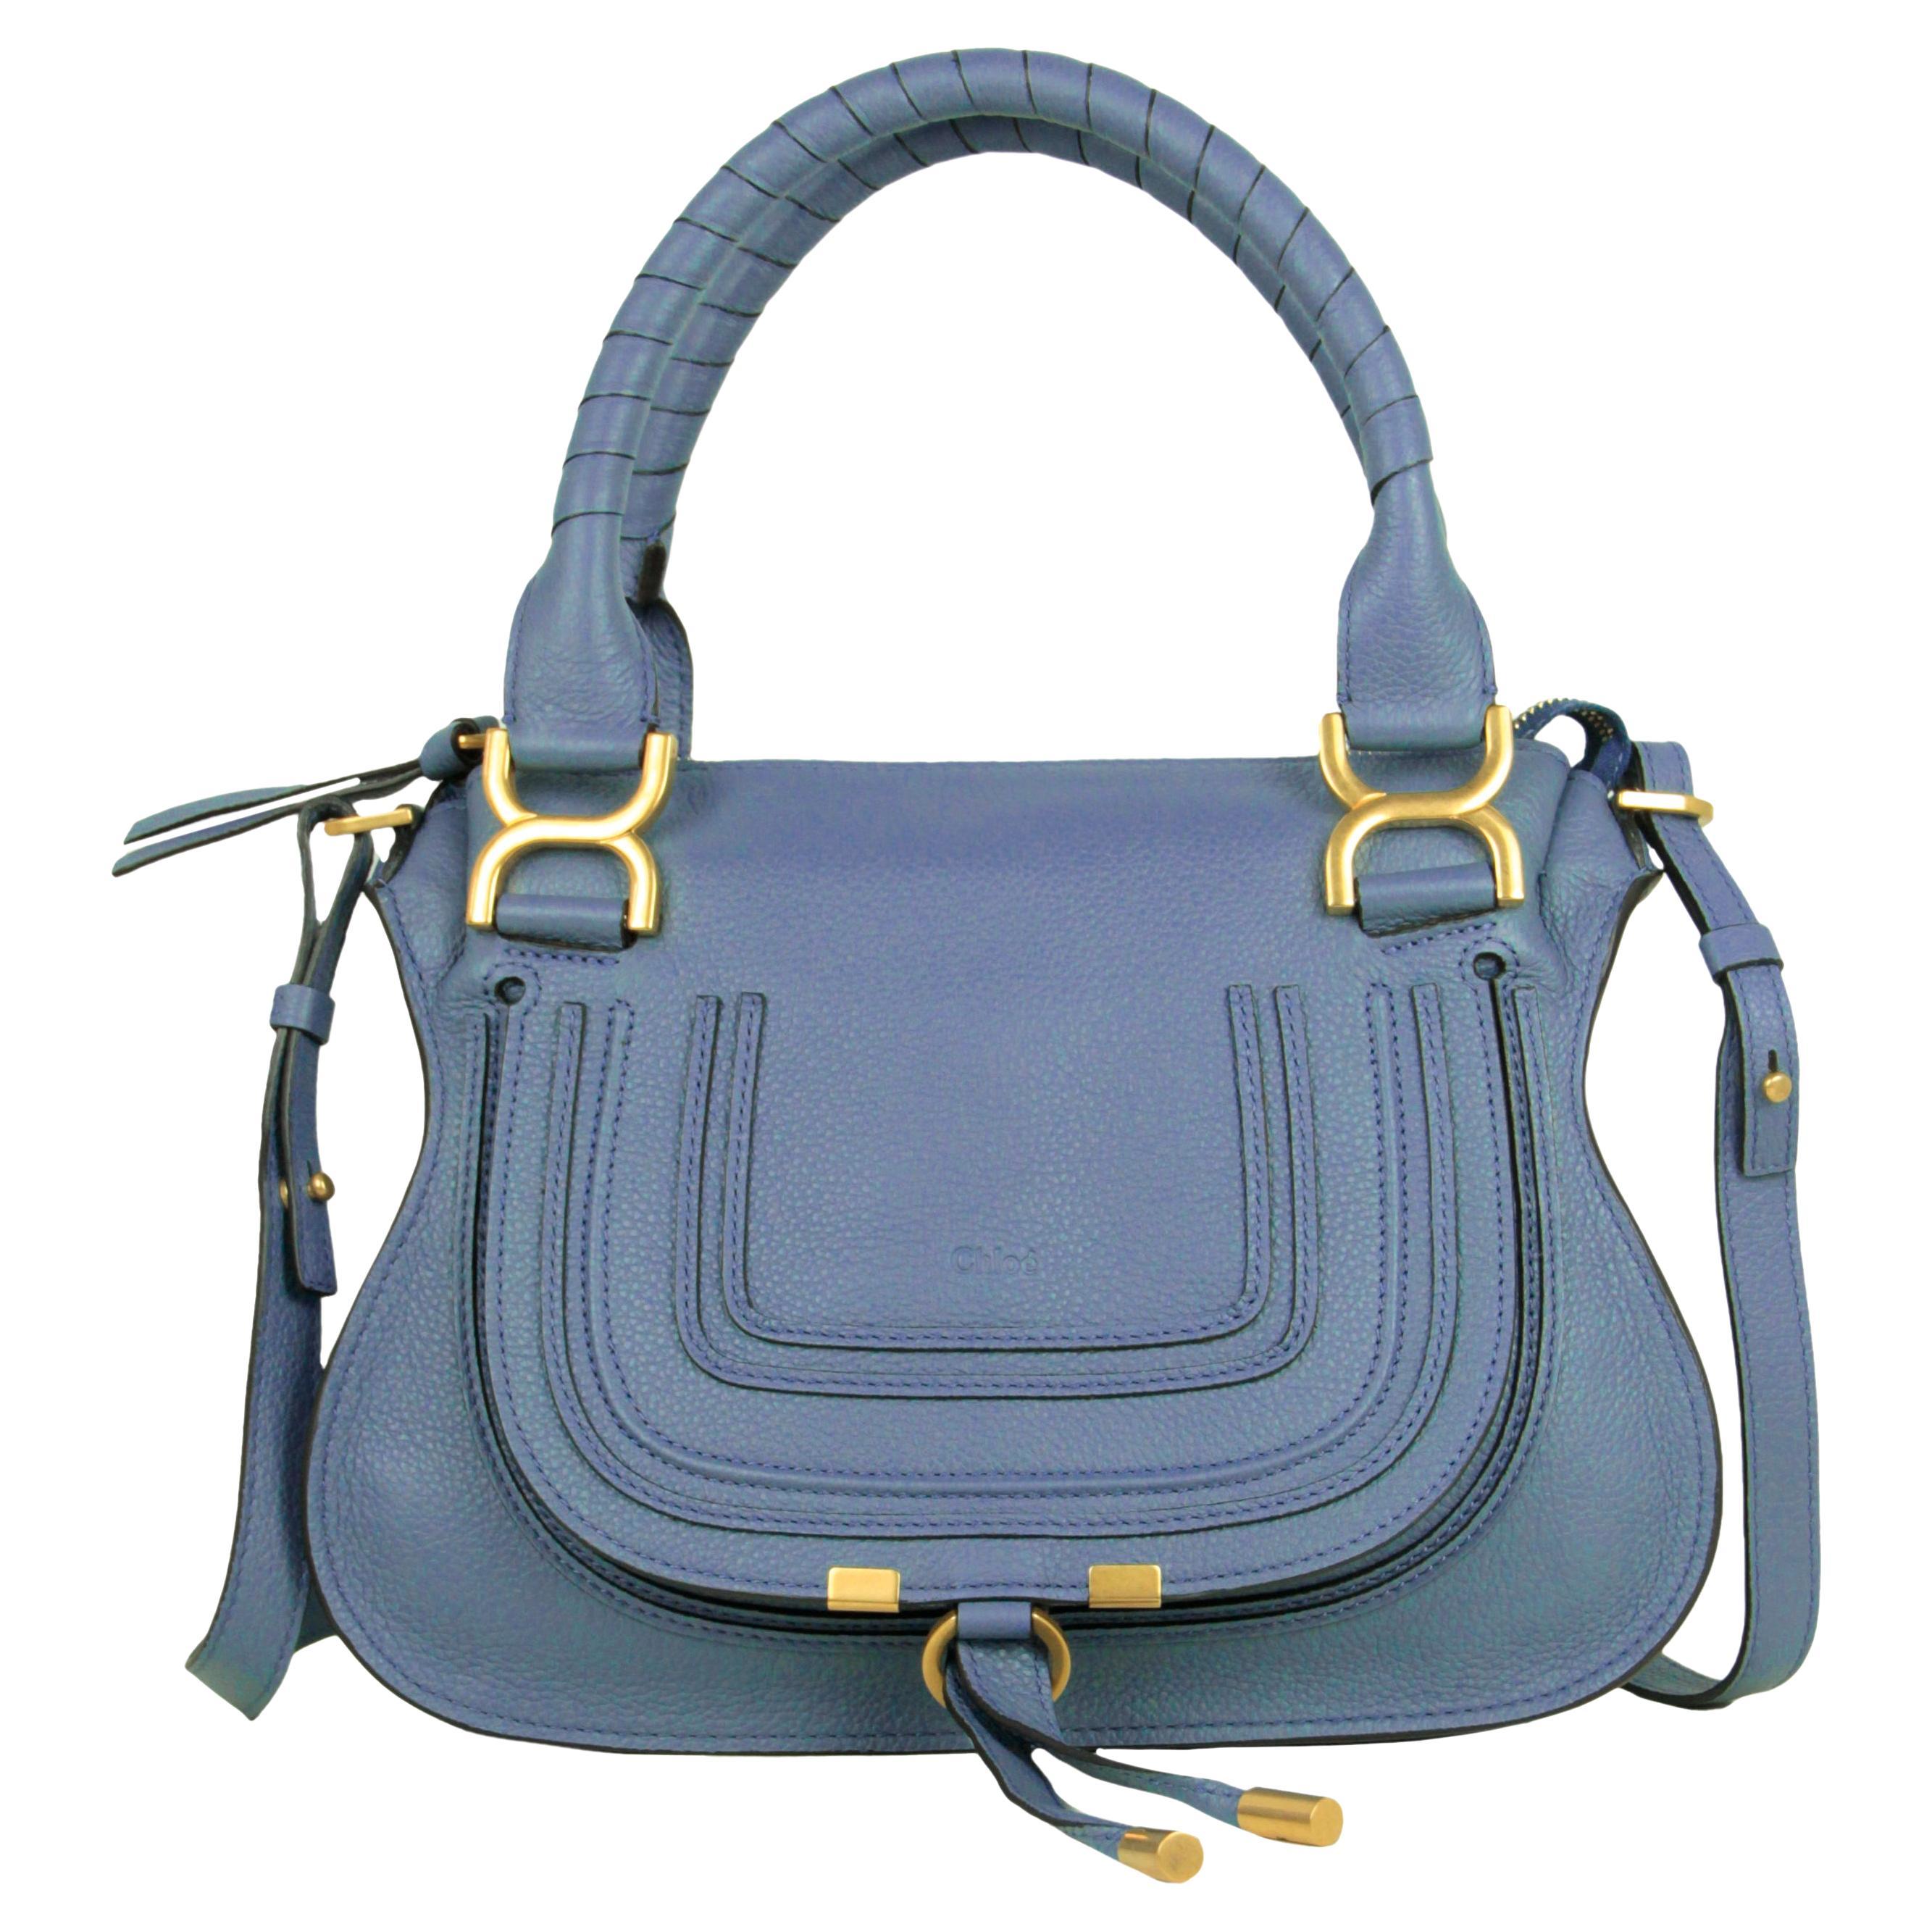 Chloe NEW Graphite Navy Leather Small Marcie Satchel Bag rt. $2, 190